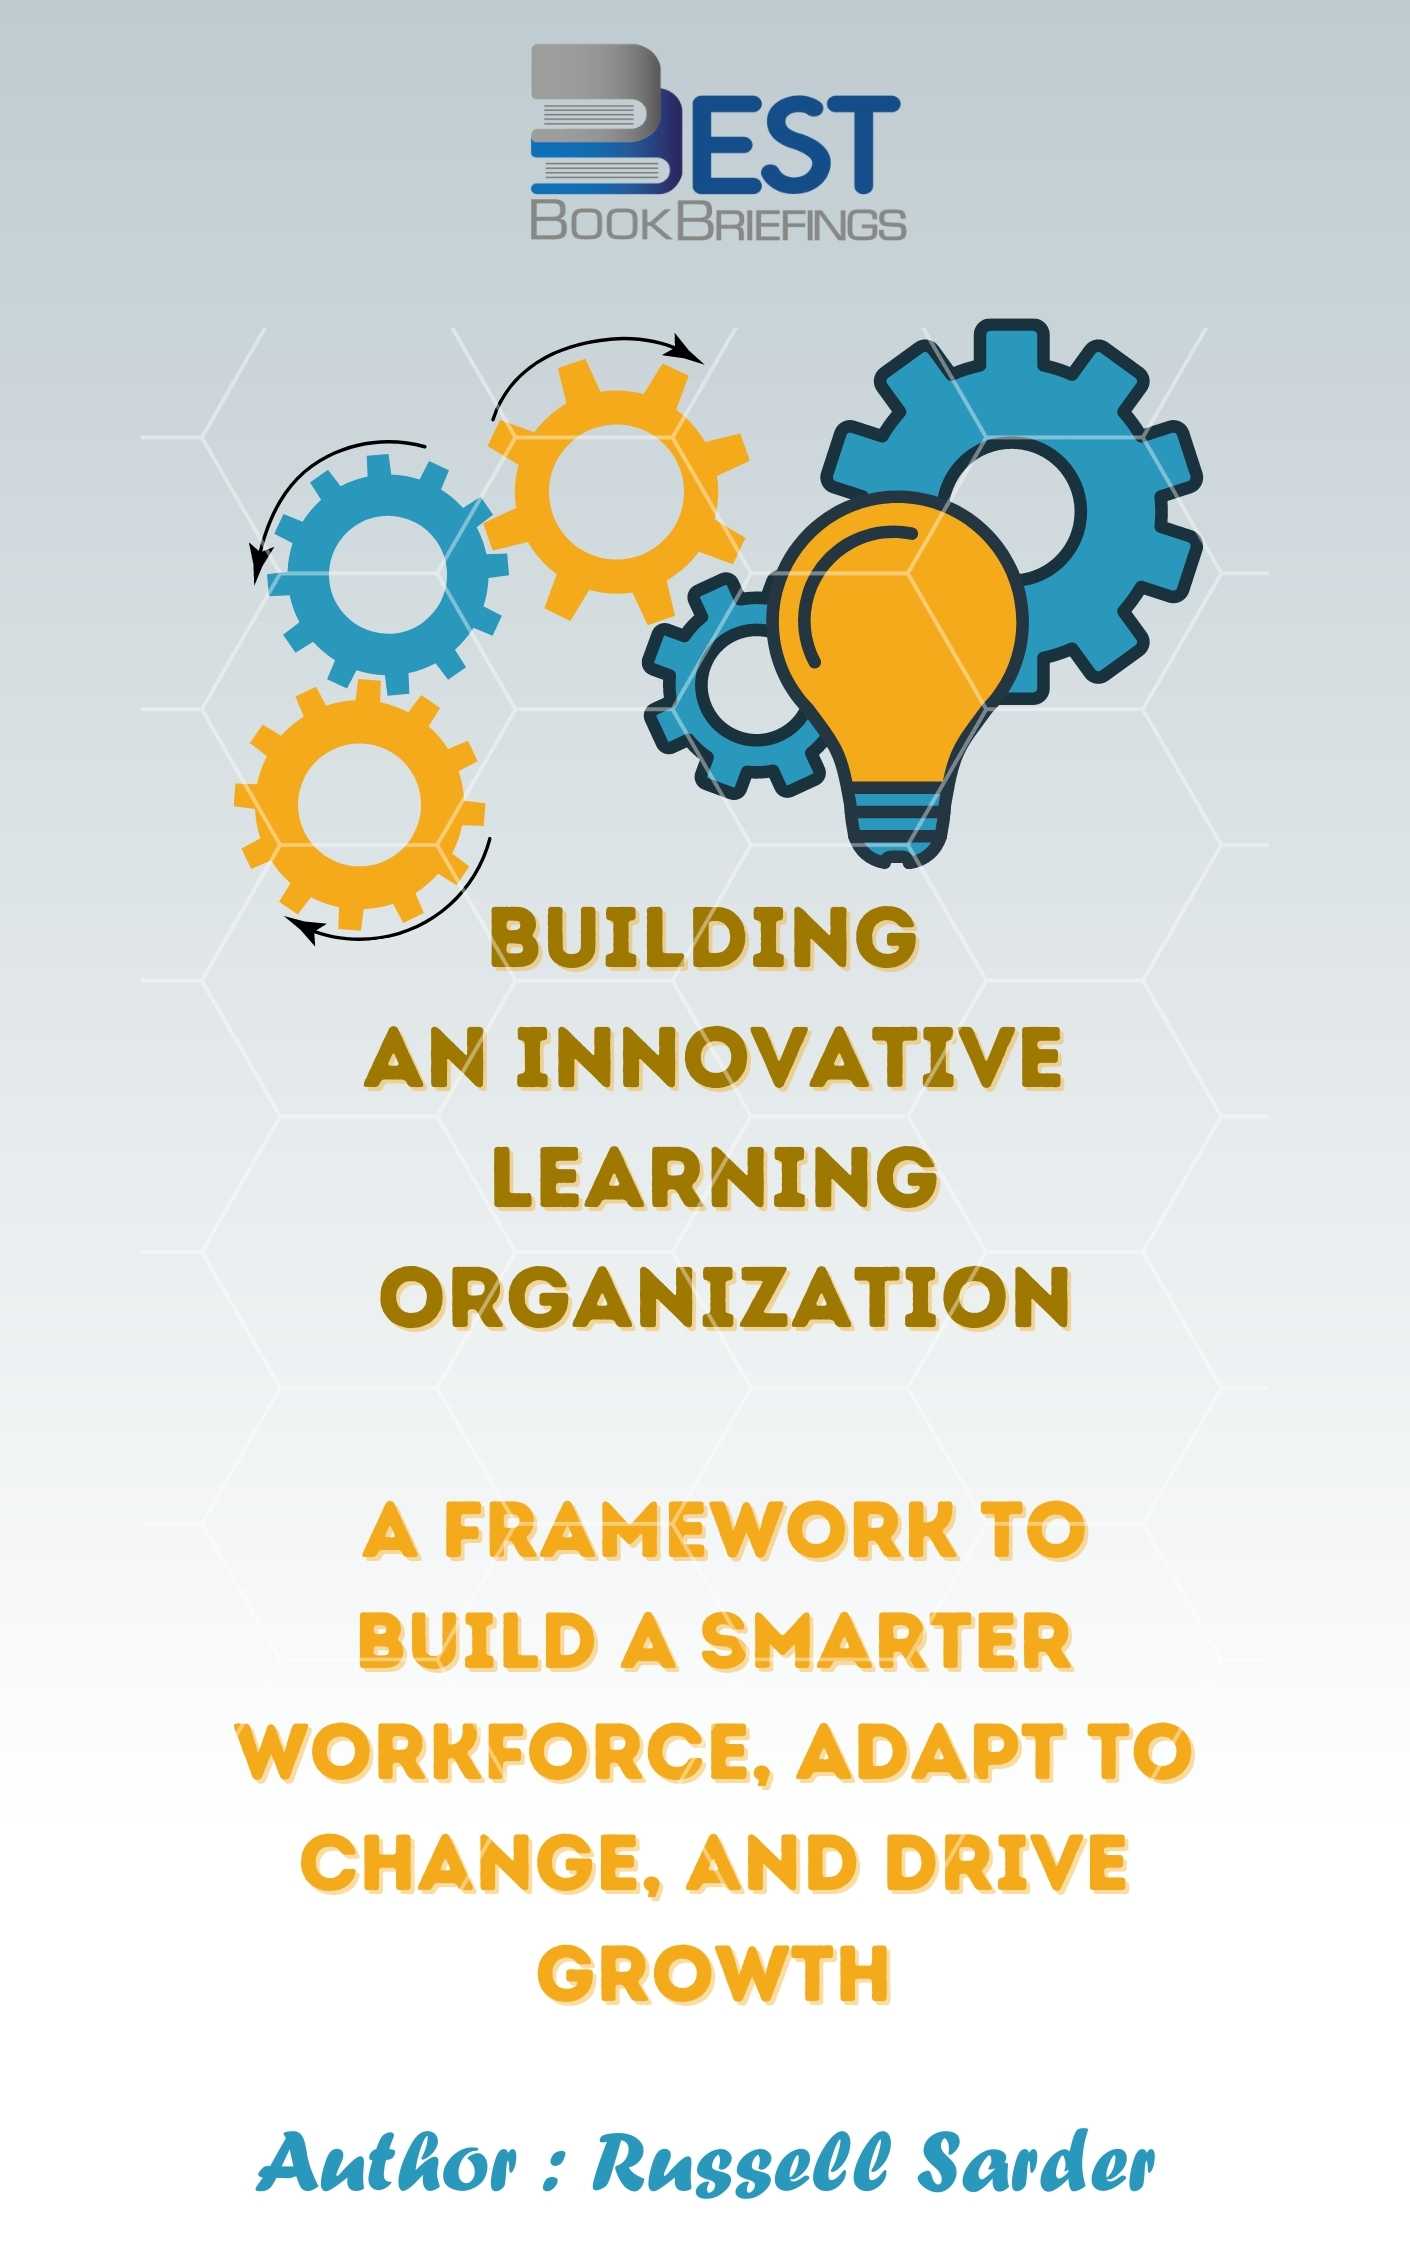 Learning organizations are composed of engaged, motivated employees who continually seek improvement, which leads to organizational agility and the ability to innovate ahead of the curve. This book is a practical, actionable guide on how to boost performance, successfully manage change, and innovate more quickly. Written by a recognized thought leader 